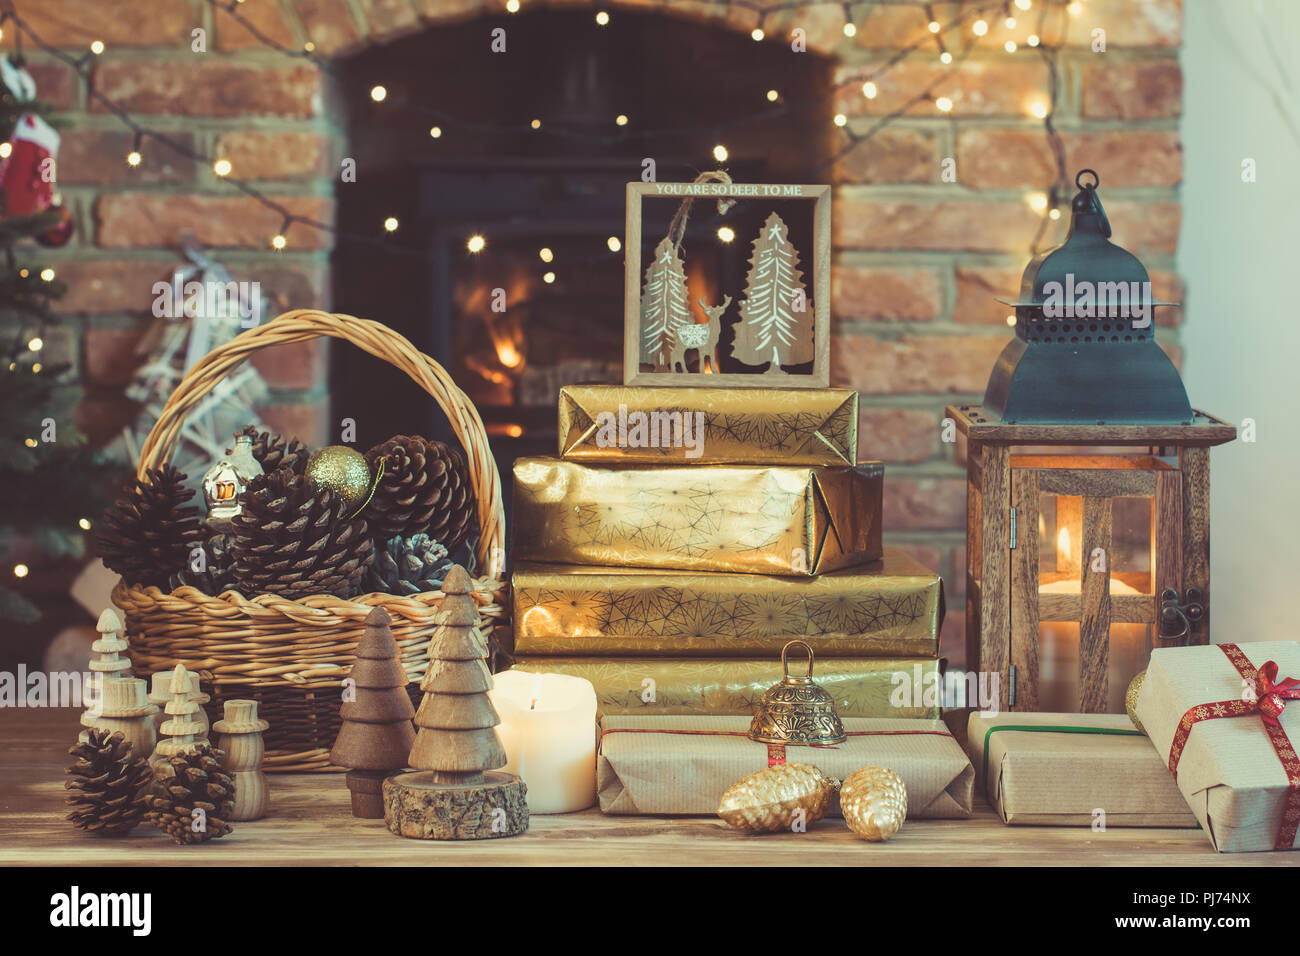 Dark Christmas composition, lantern, presents and handmade wooden  decorations on the table in front of fireplace with woodburner, ornaments  and garlan Stock Photo - Alamy